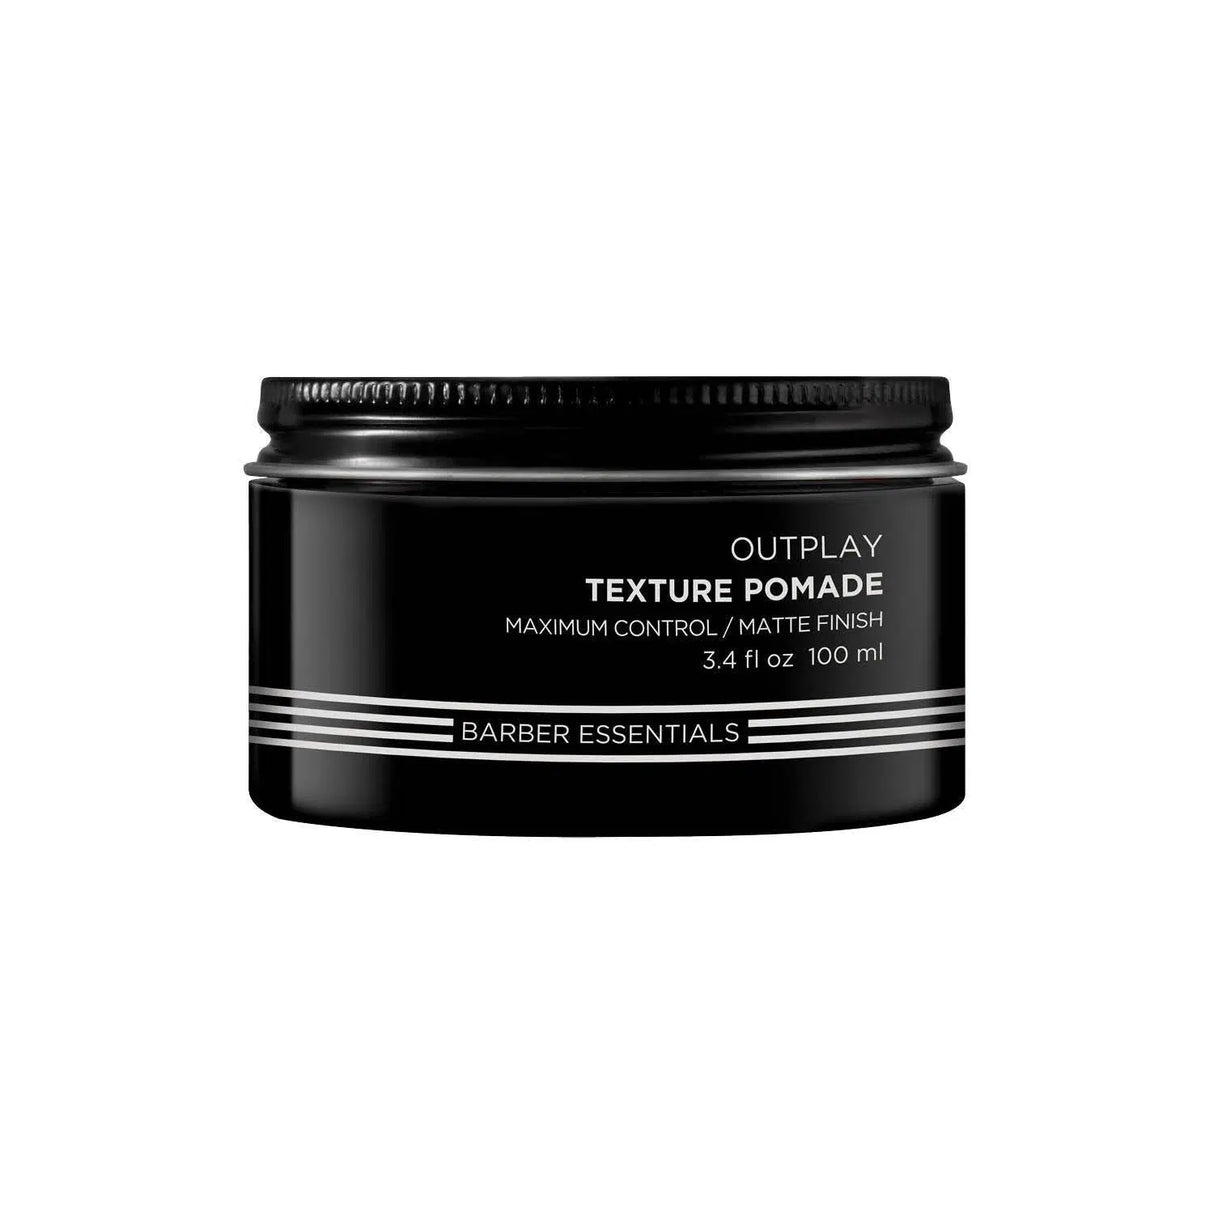 Outplay Texture Pomade